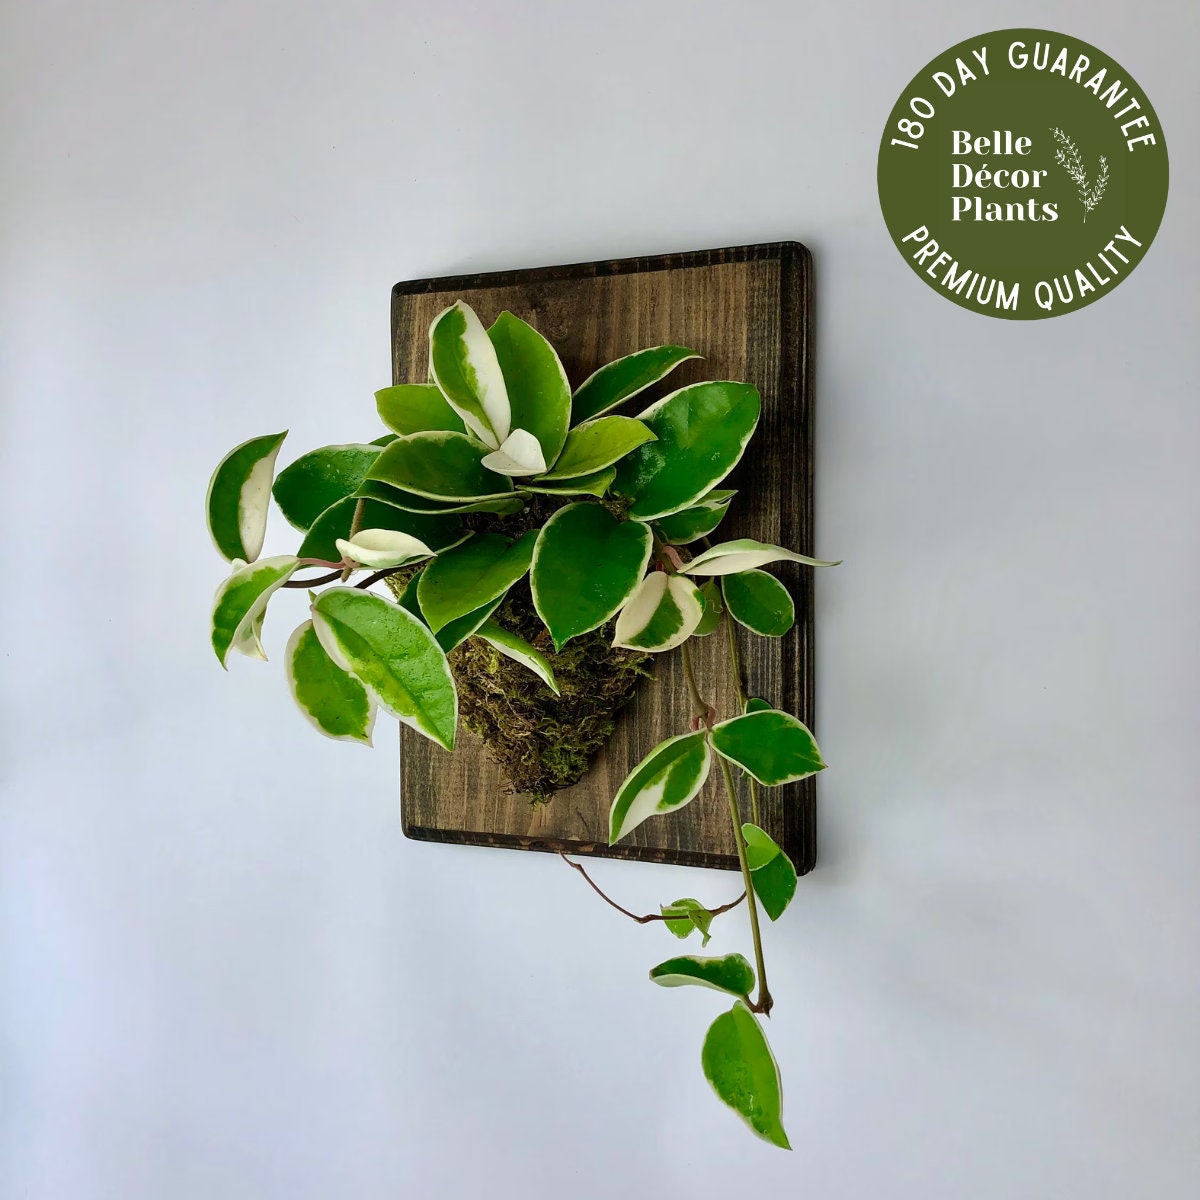 How to Make a Wood Mounted Hoya - City Floral Garden Center